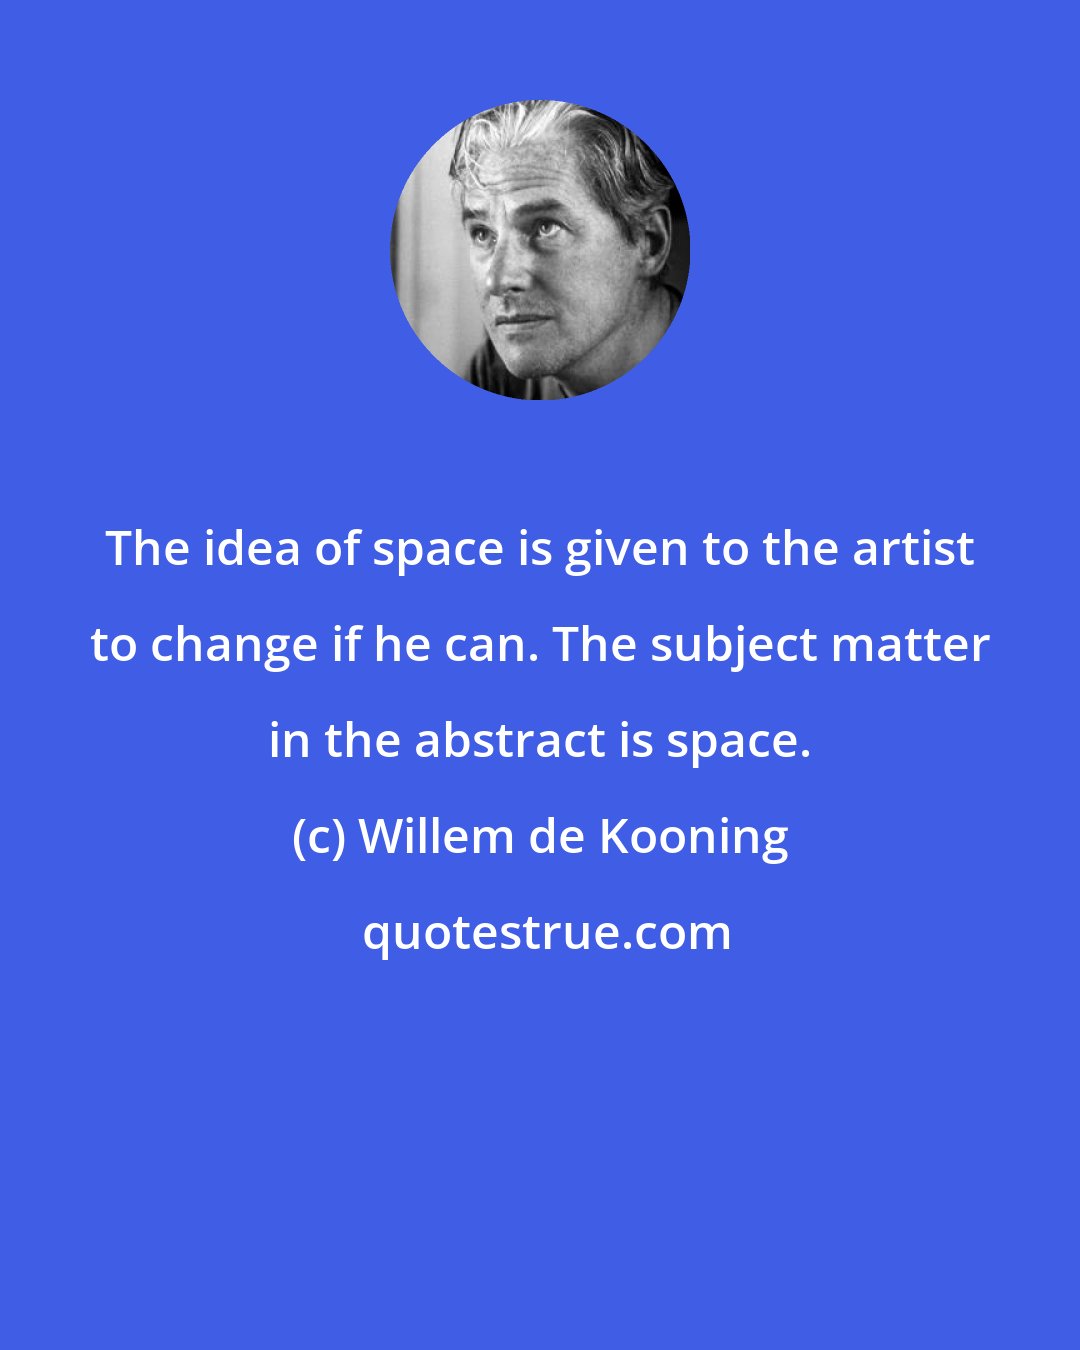 Willem de Kooning: The idea of space is given to the artist to change if he can. The subject matter in the abstract is space.